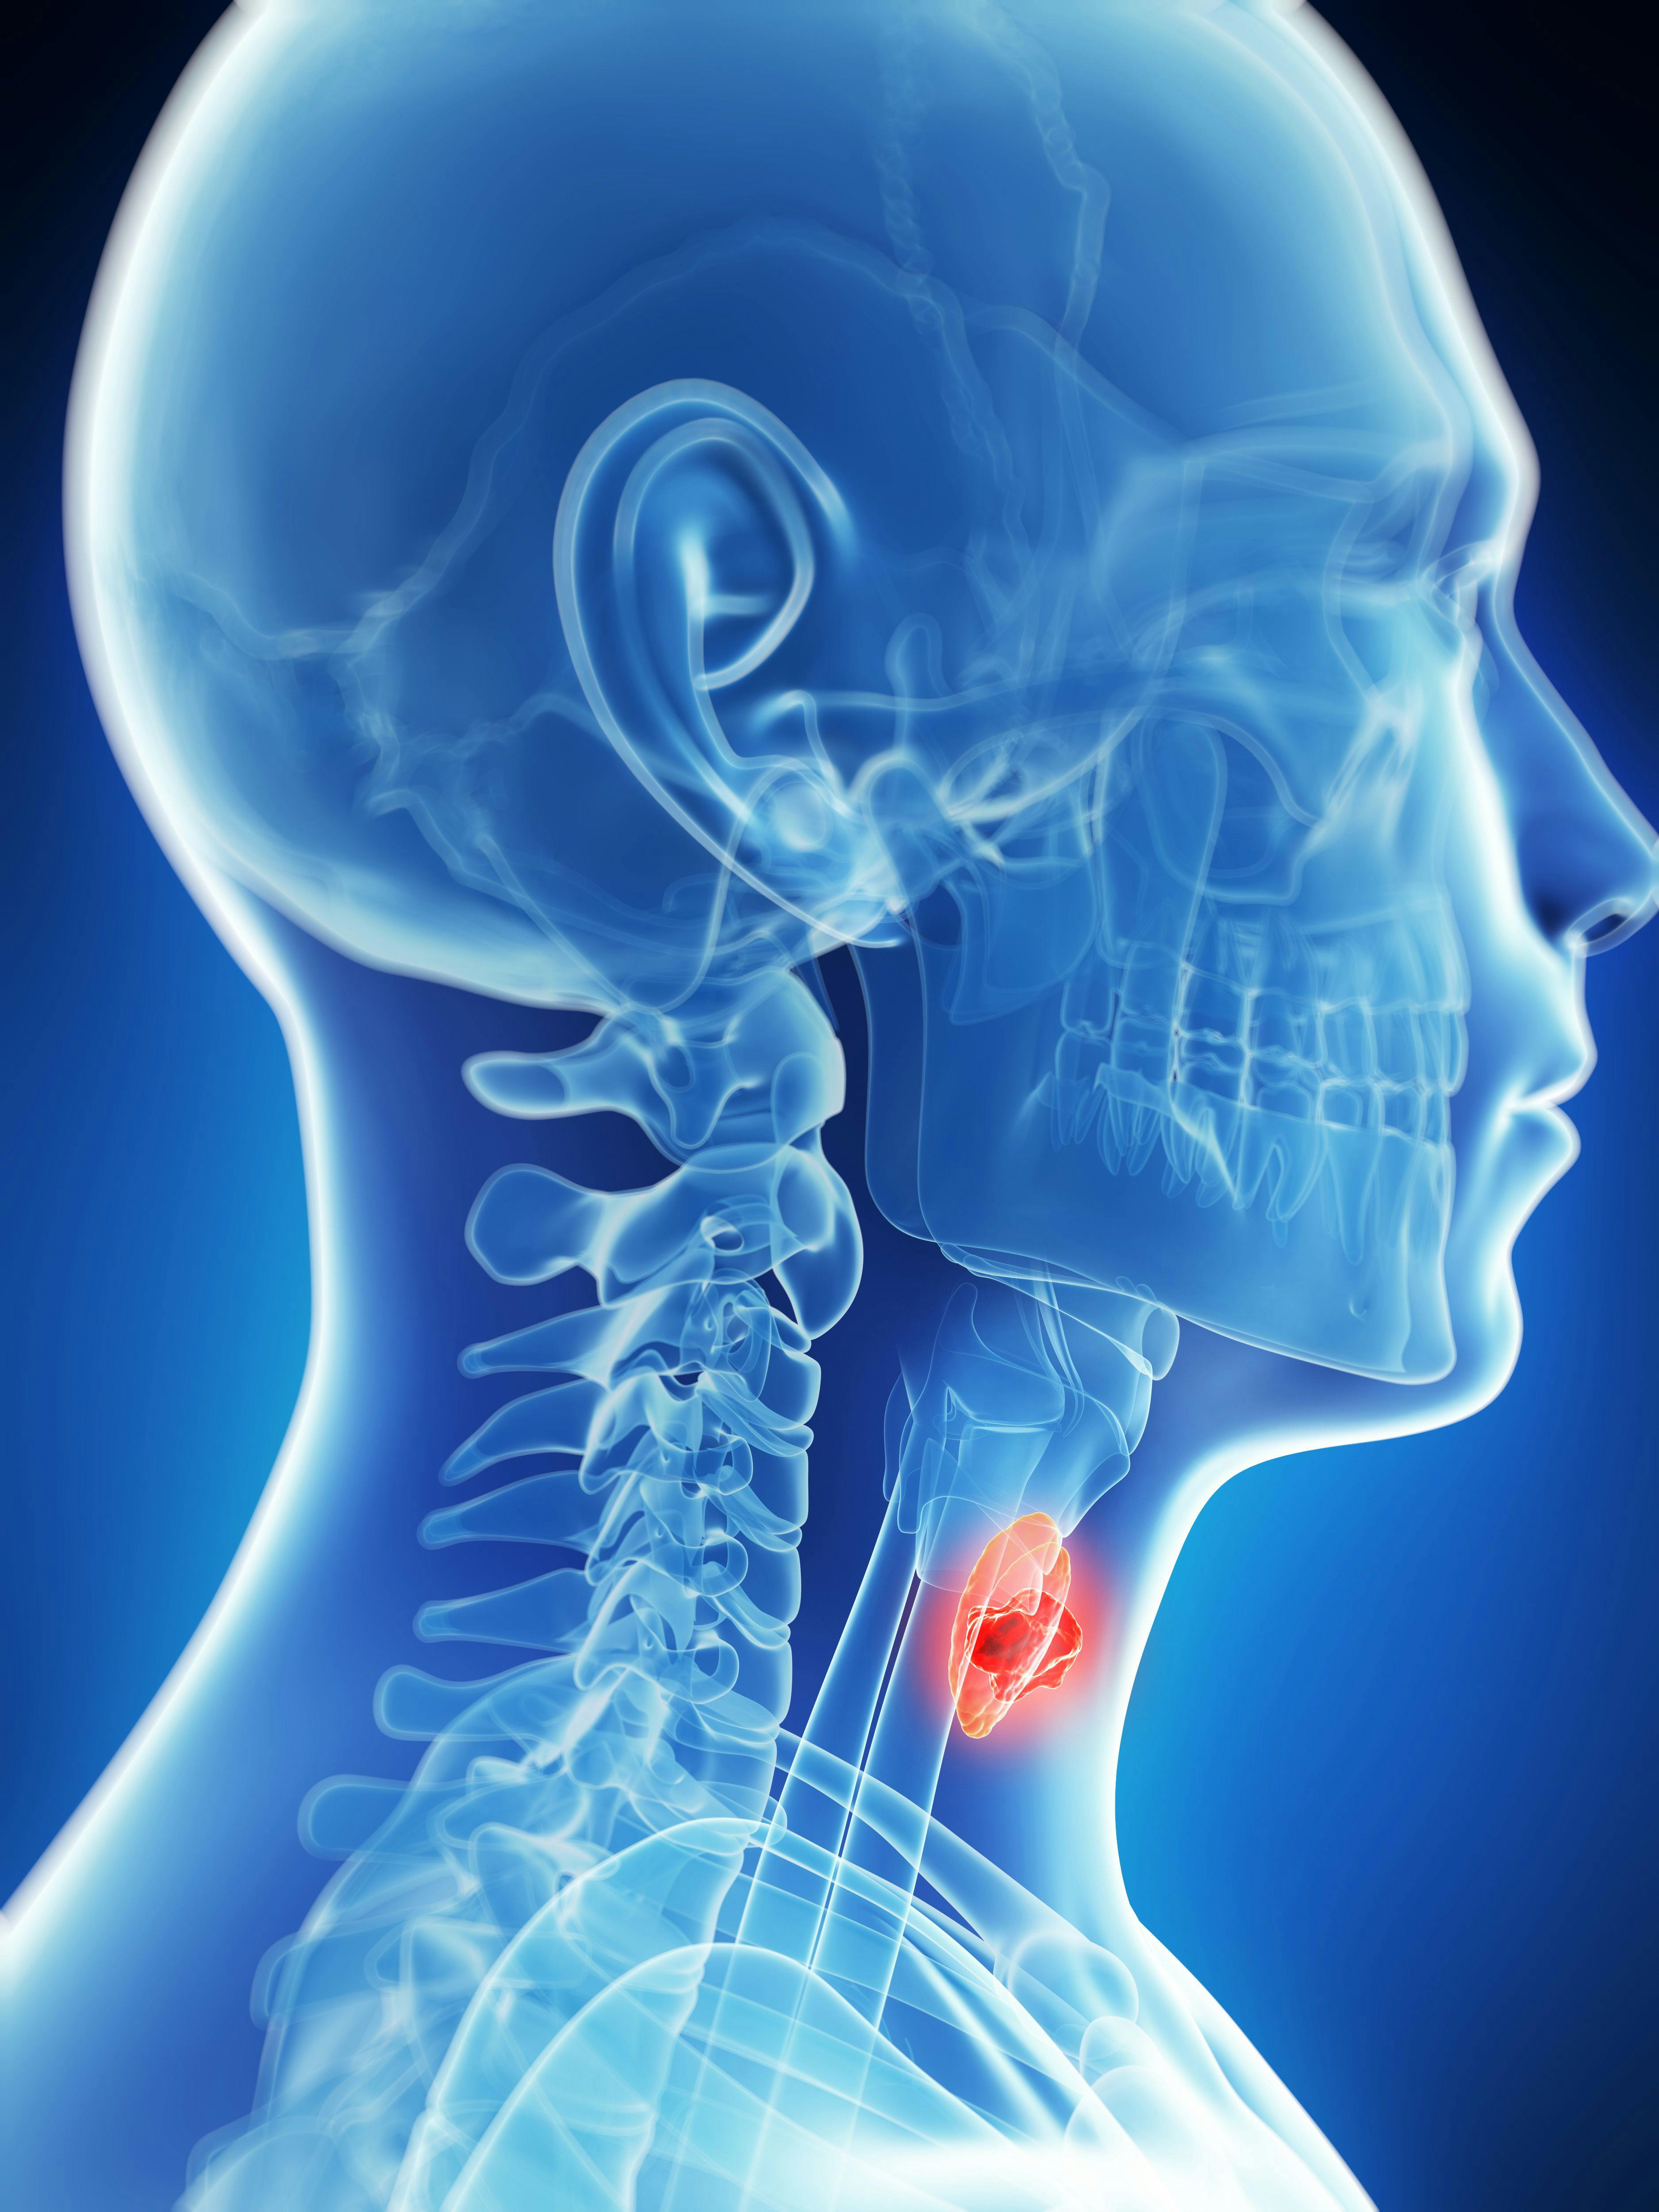 Prior Therapy Does Not Influence Selpercatinib Efficacy in RET+ Medullary Thyroid Cancer